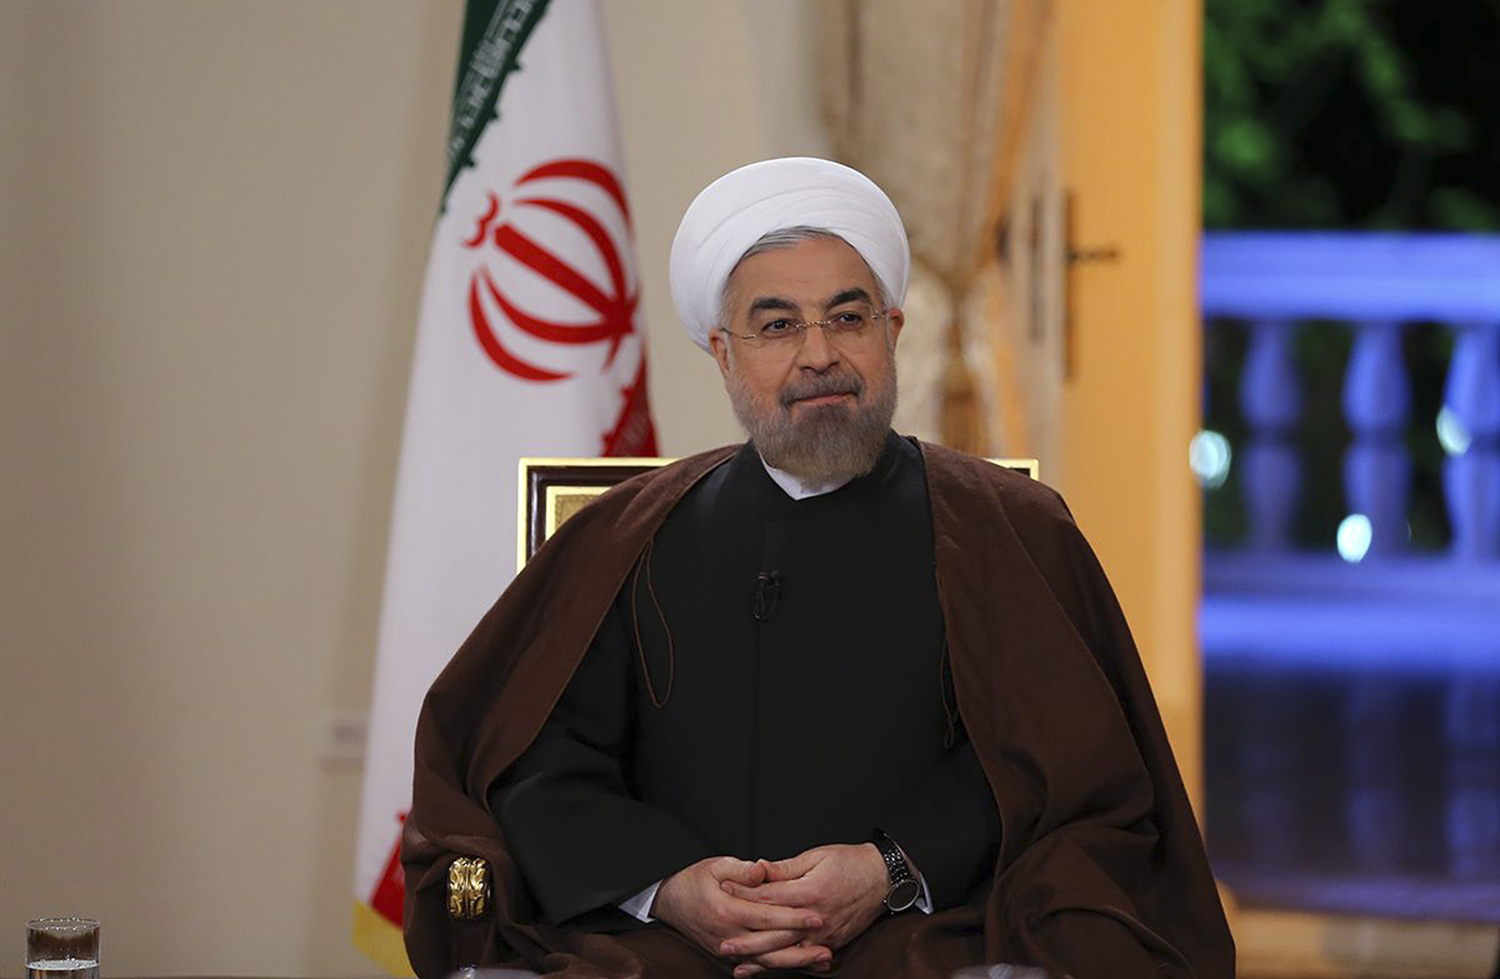 Iranian President Hassan Rouhani participates in an interview in Tehran on Oct. 13, 2014 (Mohammad Berno—AP)